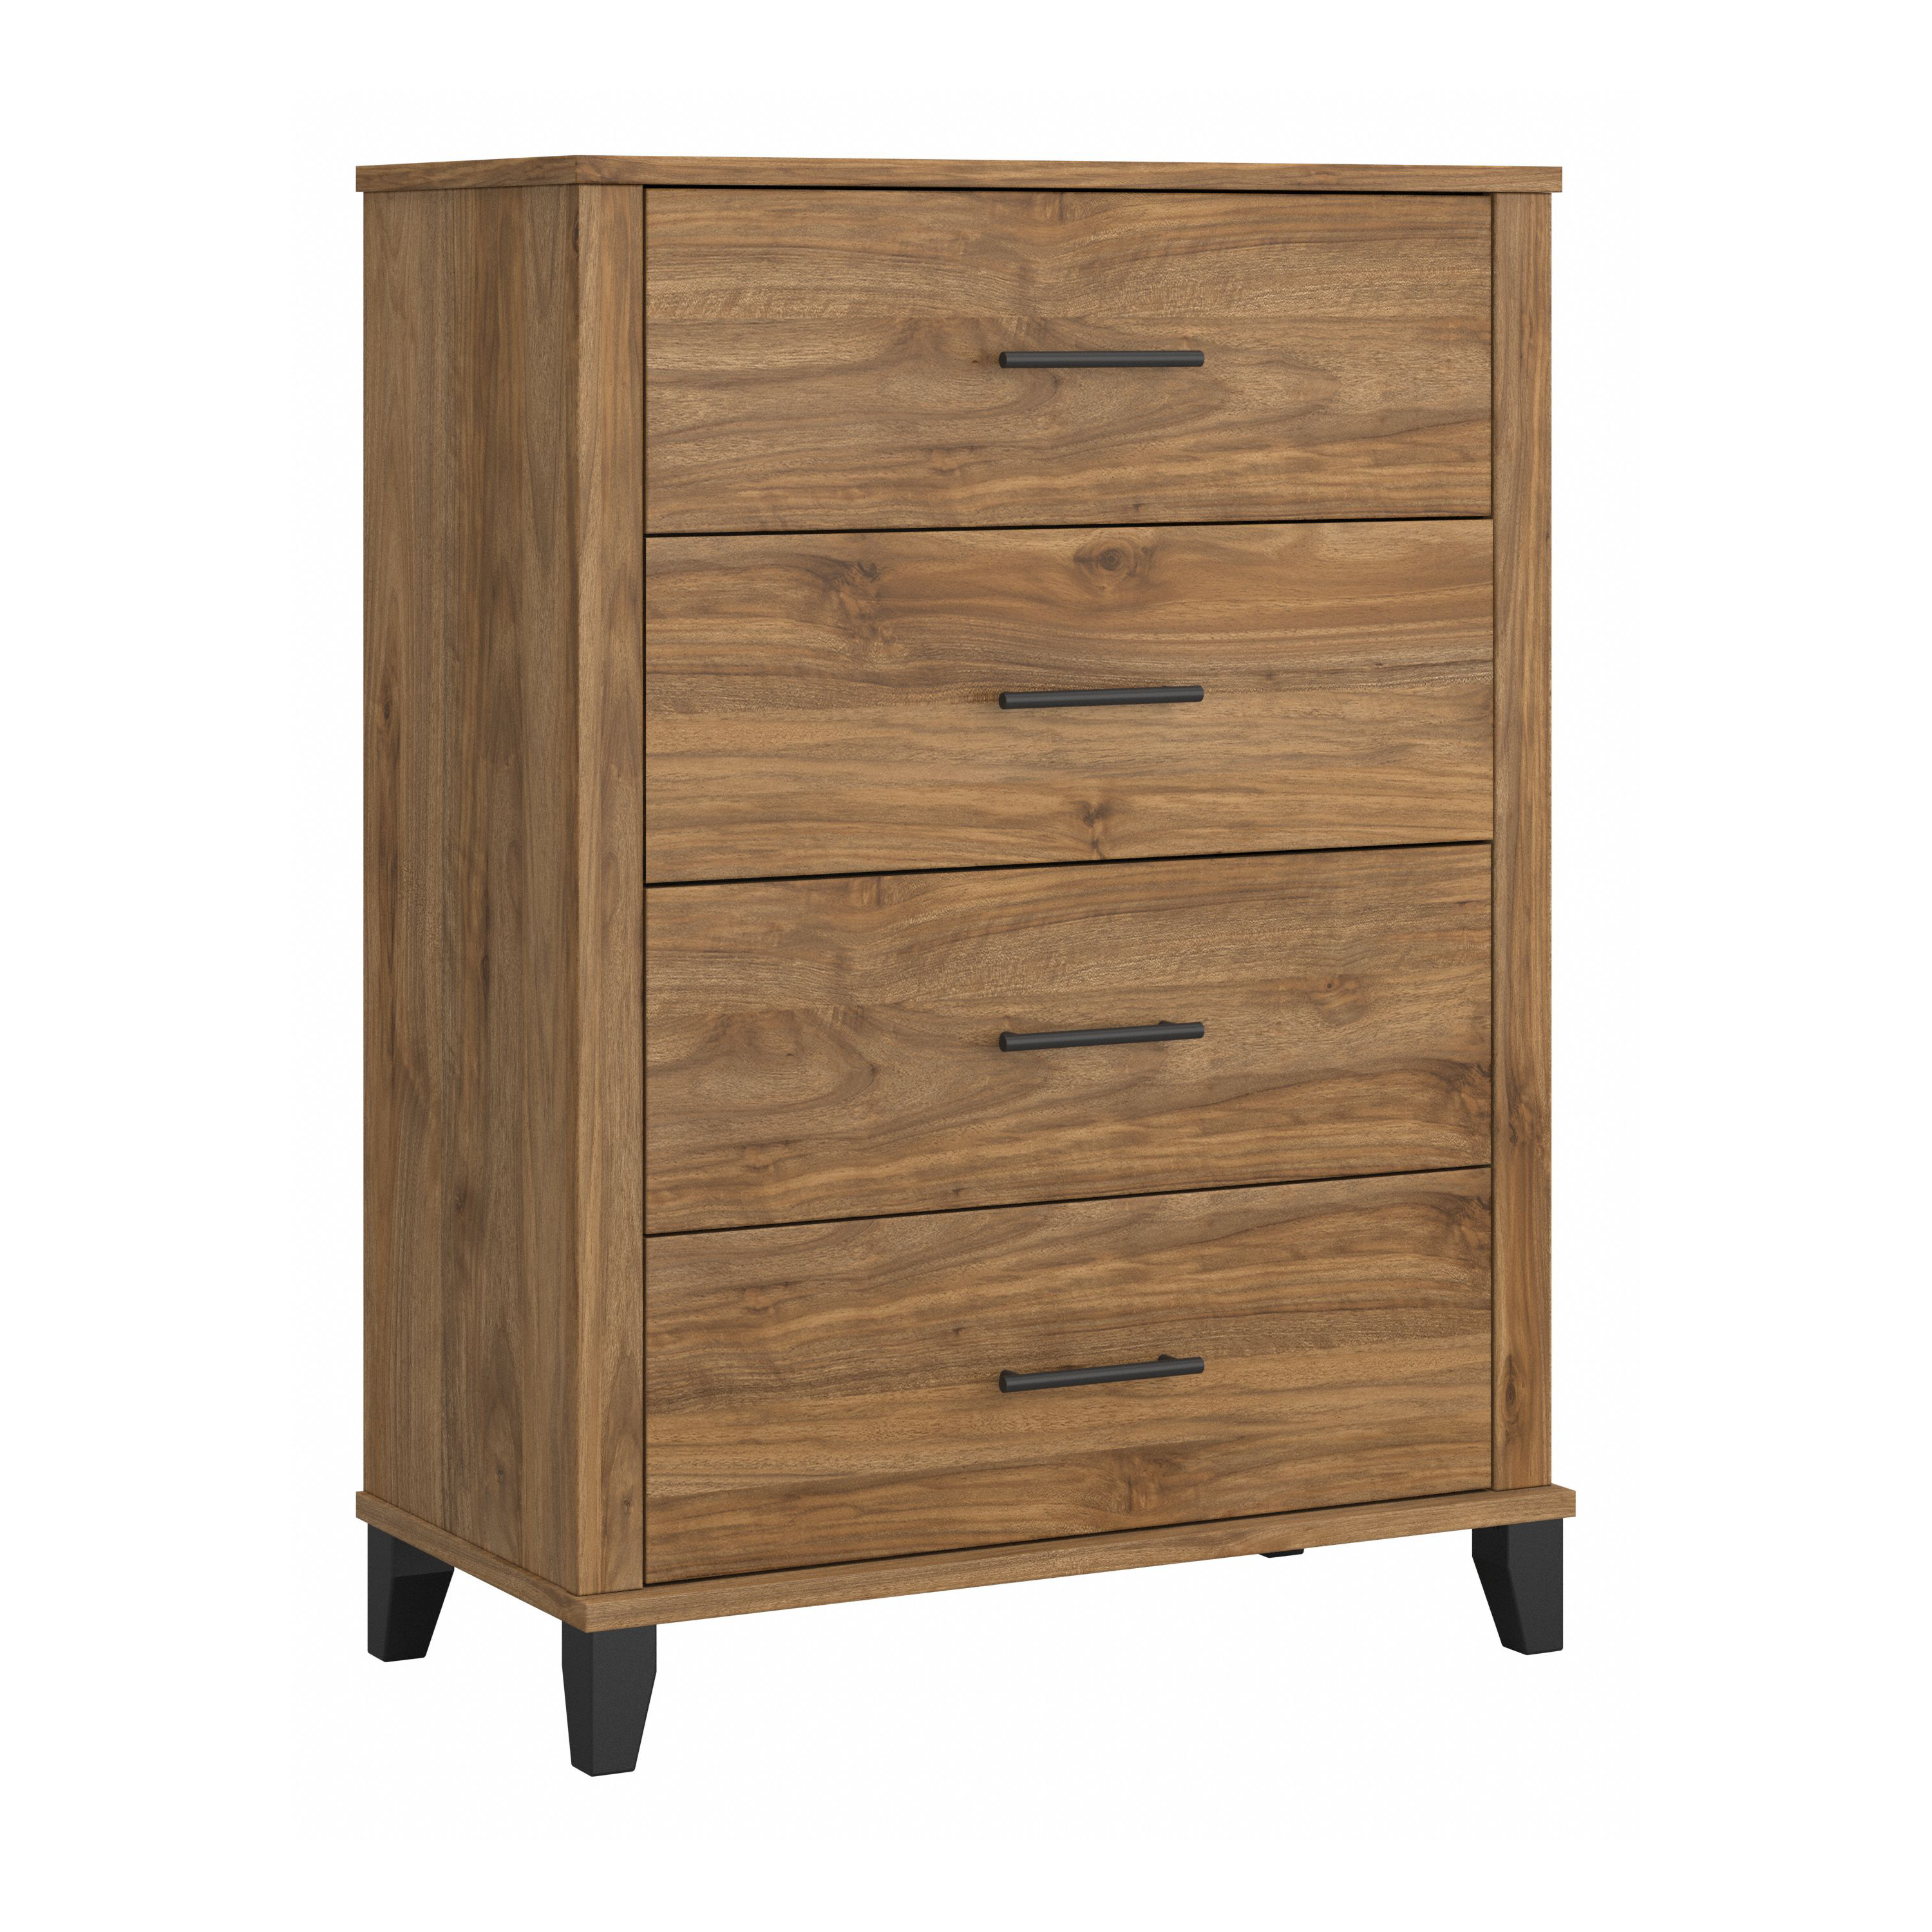 Shop Bush Furniture Somerset Chest of Drawers 02 STS132FW #color_fresh walnut